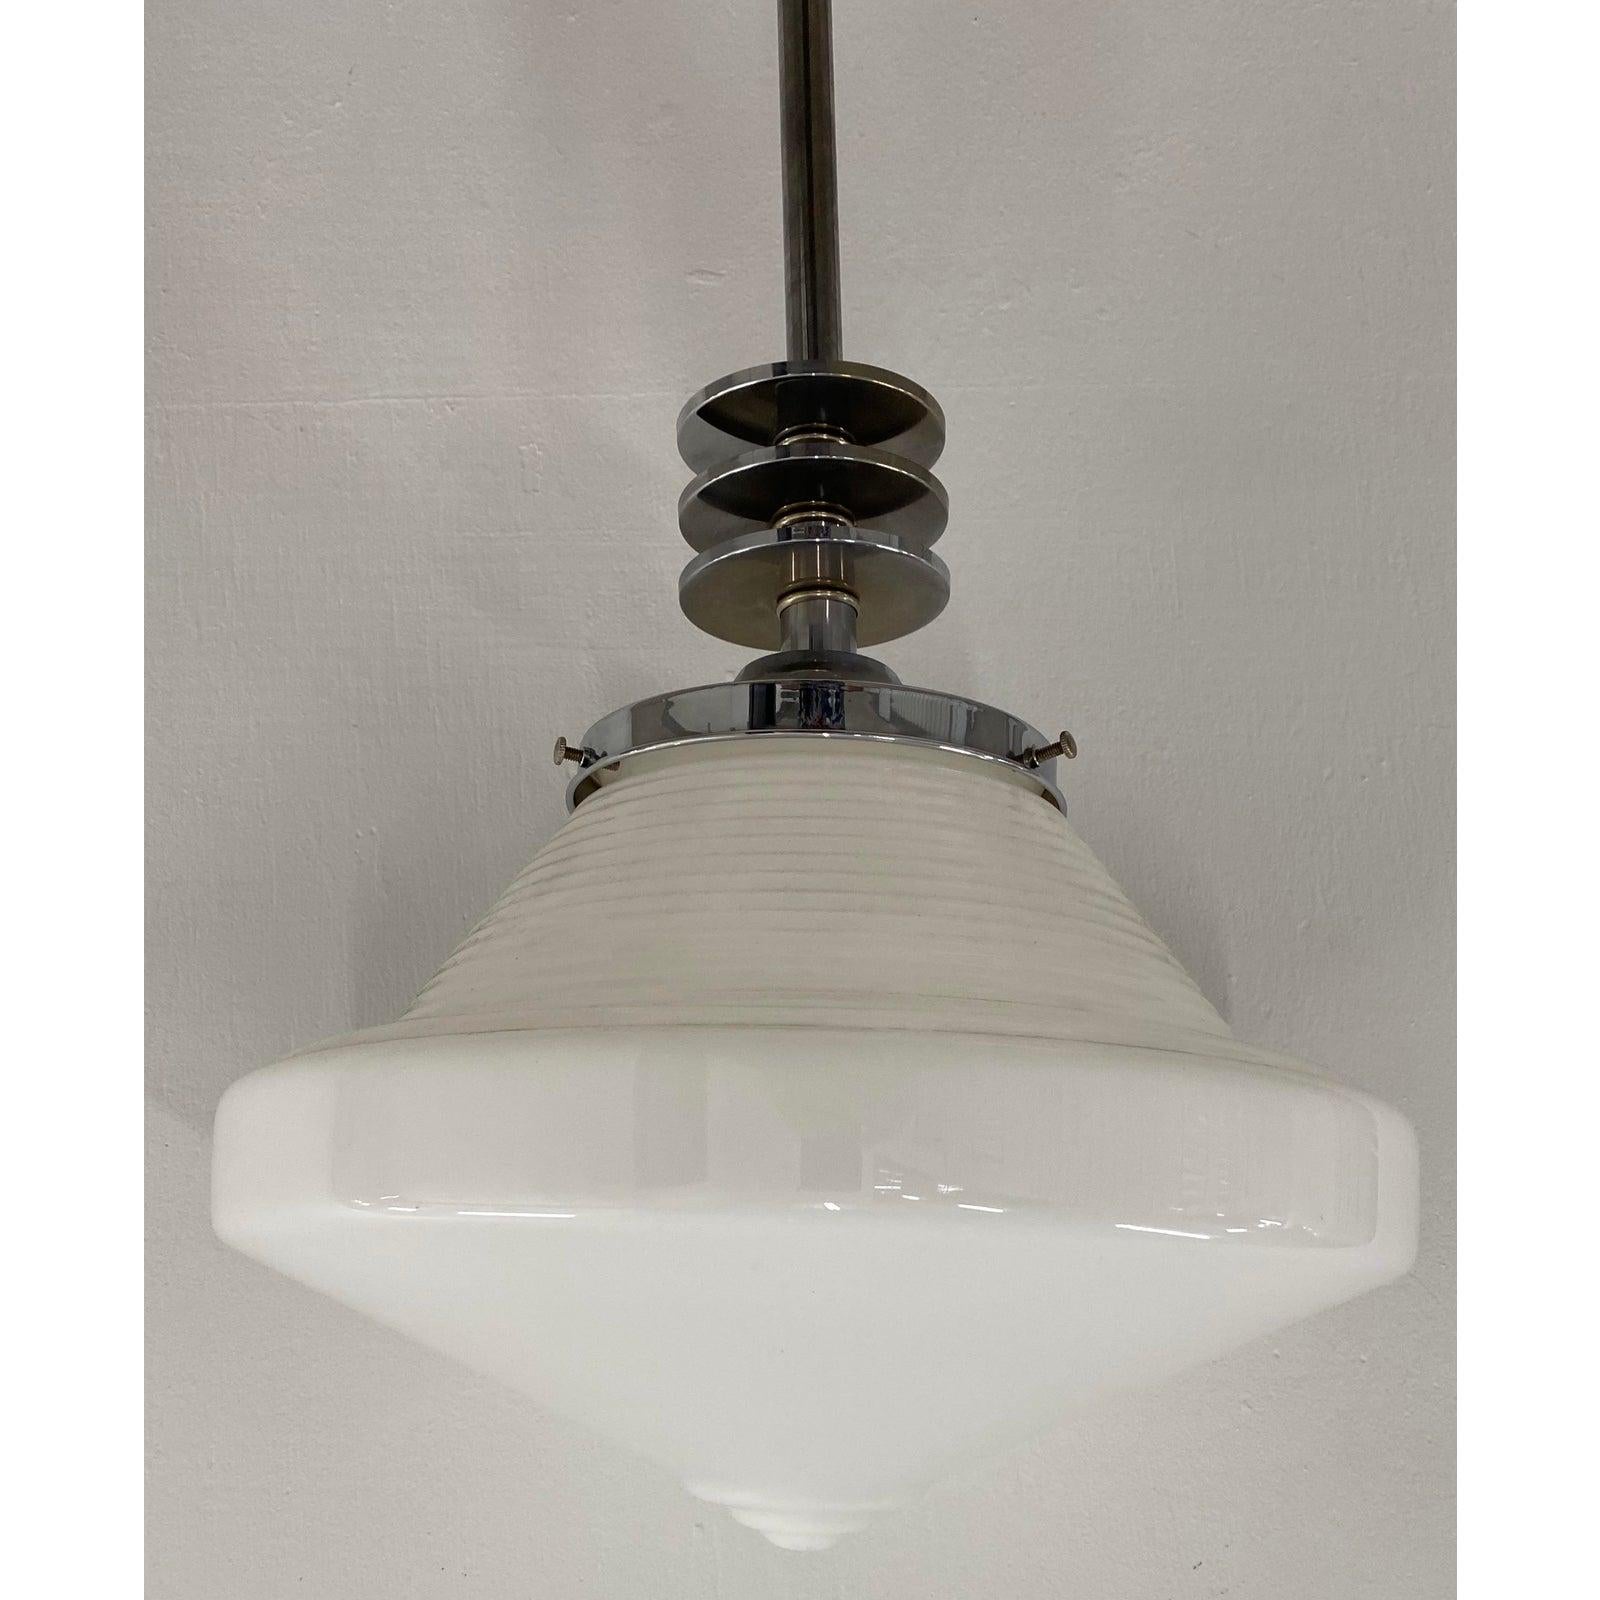 Art Deco chrome & glass pendant light, circa 1930s

A Classic Deco pendant chandelier that will look great in any room of your home. From the game room to the dining room. A great vintage find!

The shade is 14